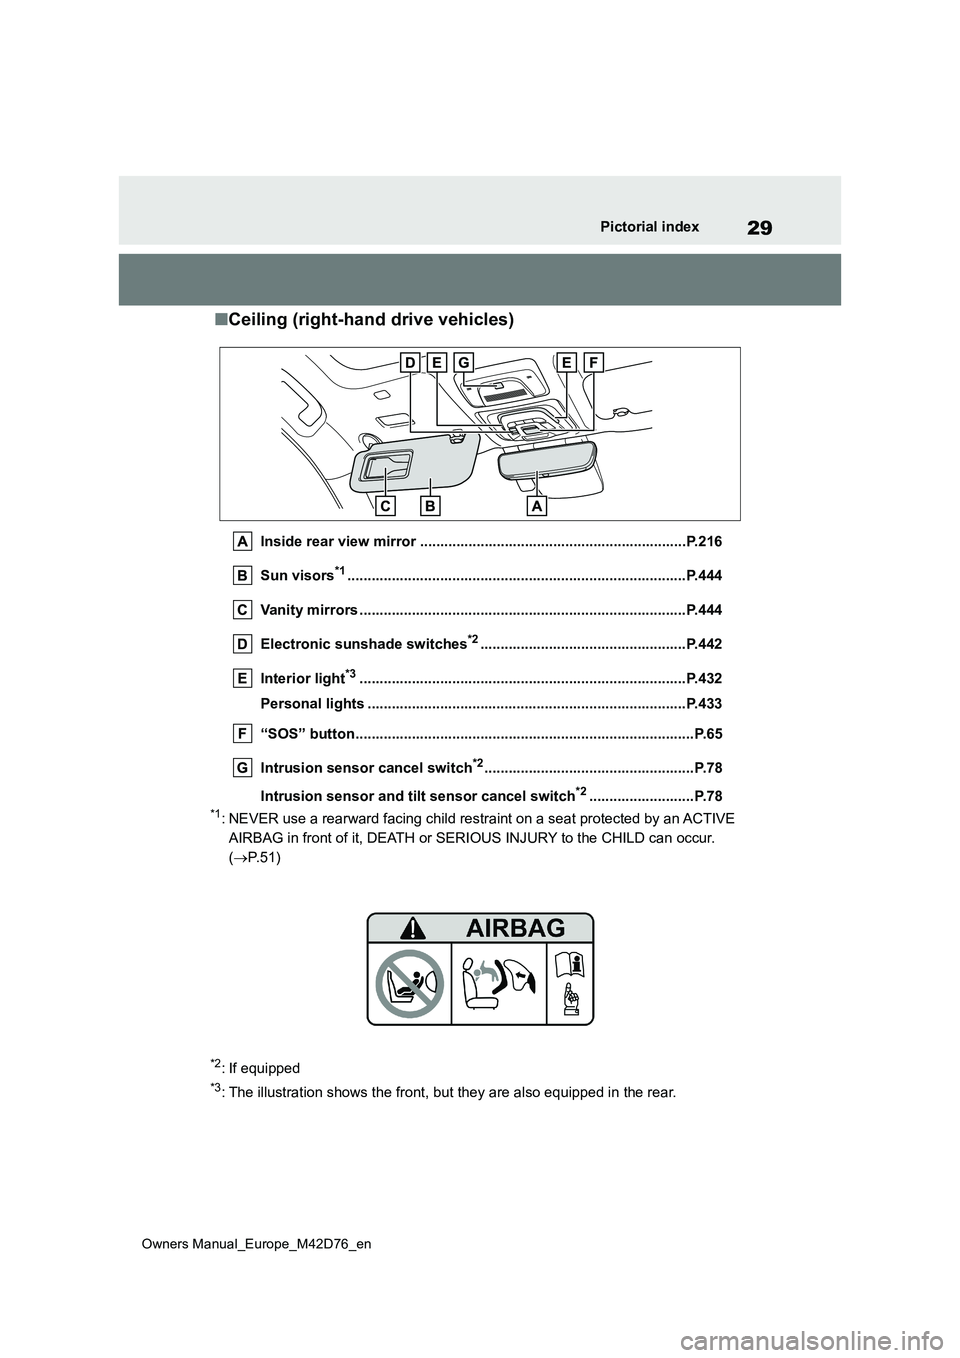 TOYOTA BZ4X 2022  Owners Manual (in English) 29
Owners Manual_Europe_M42D76_en
Pictorial index
■Ceiling (right-hand drive vehicles)
Inside rear view mirror ..................................................................P.216 
Sun visors*1..